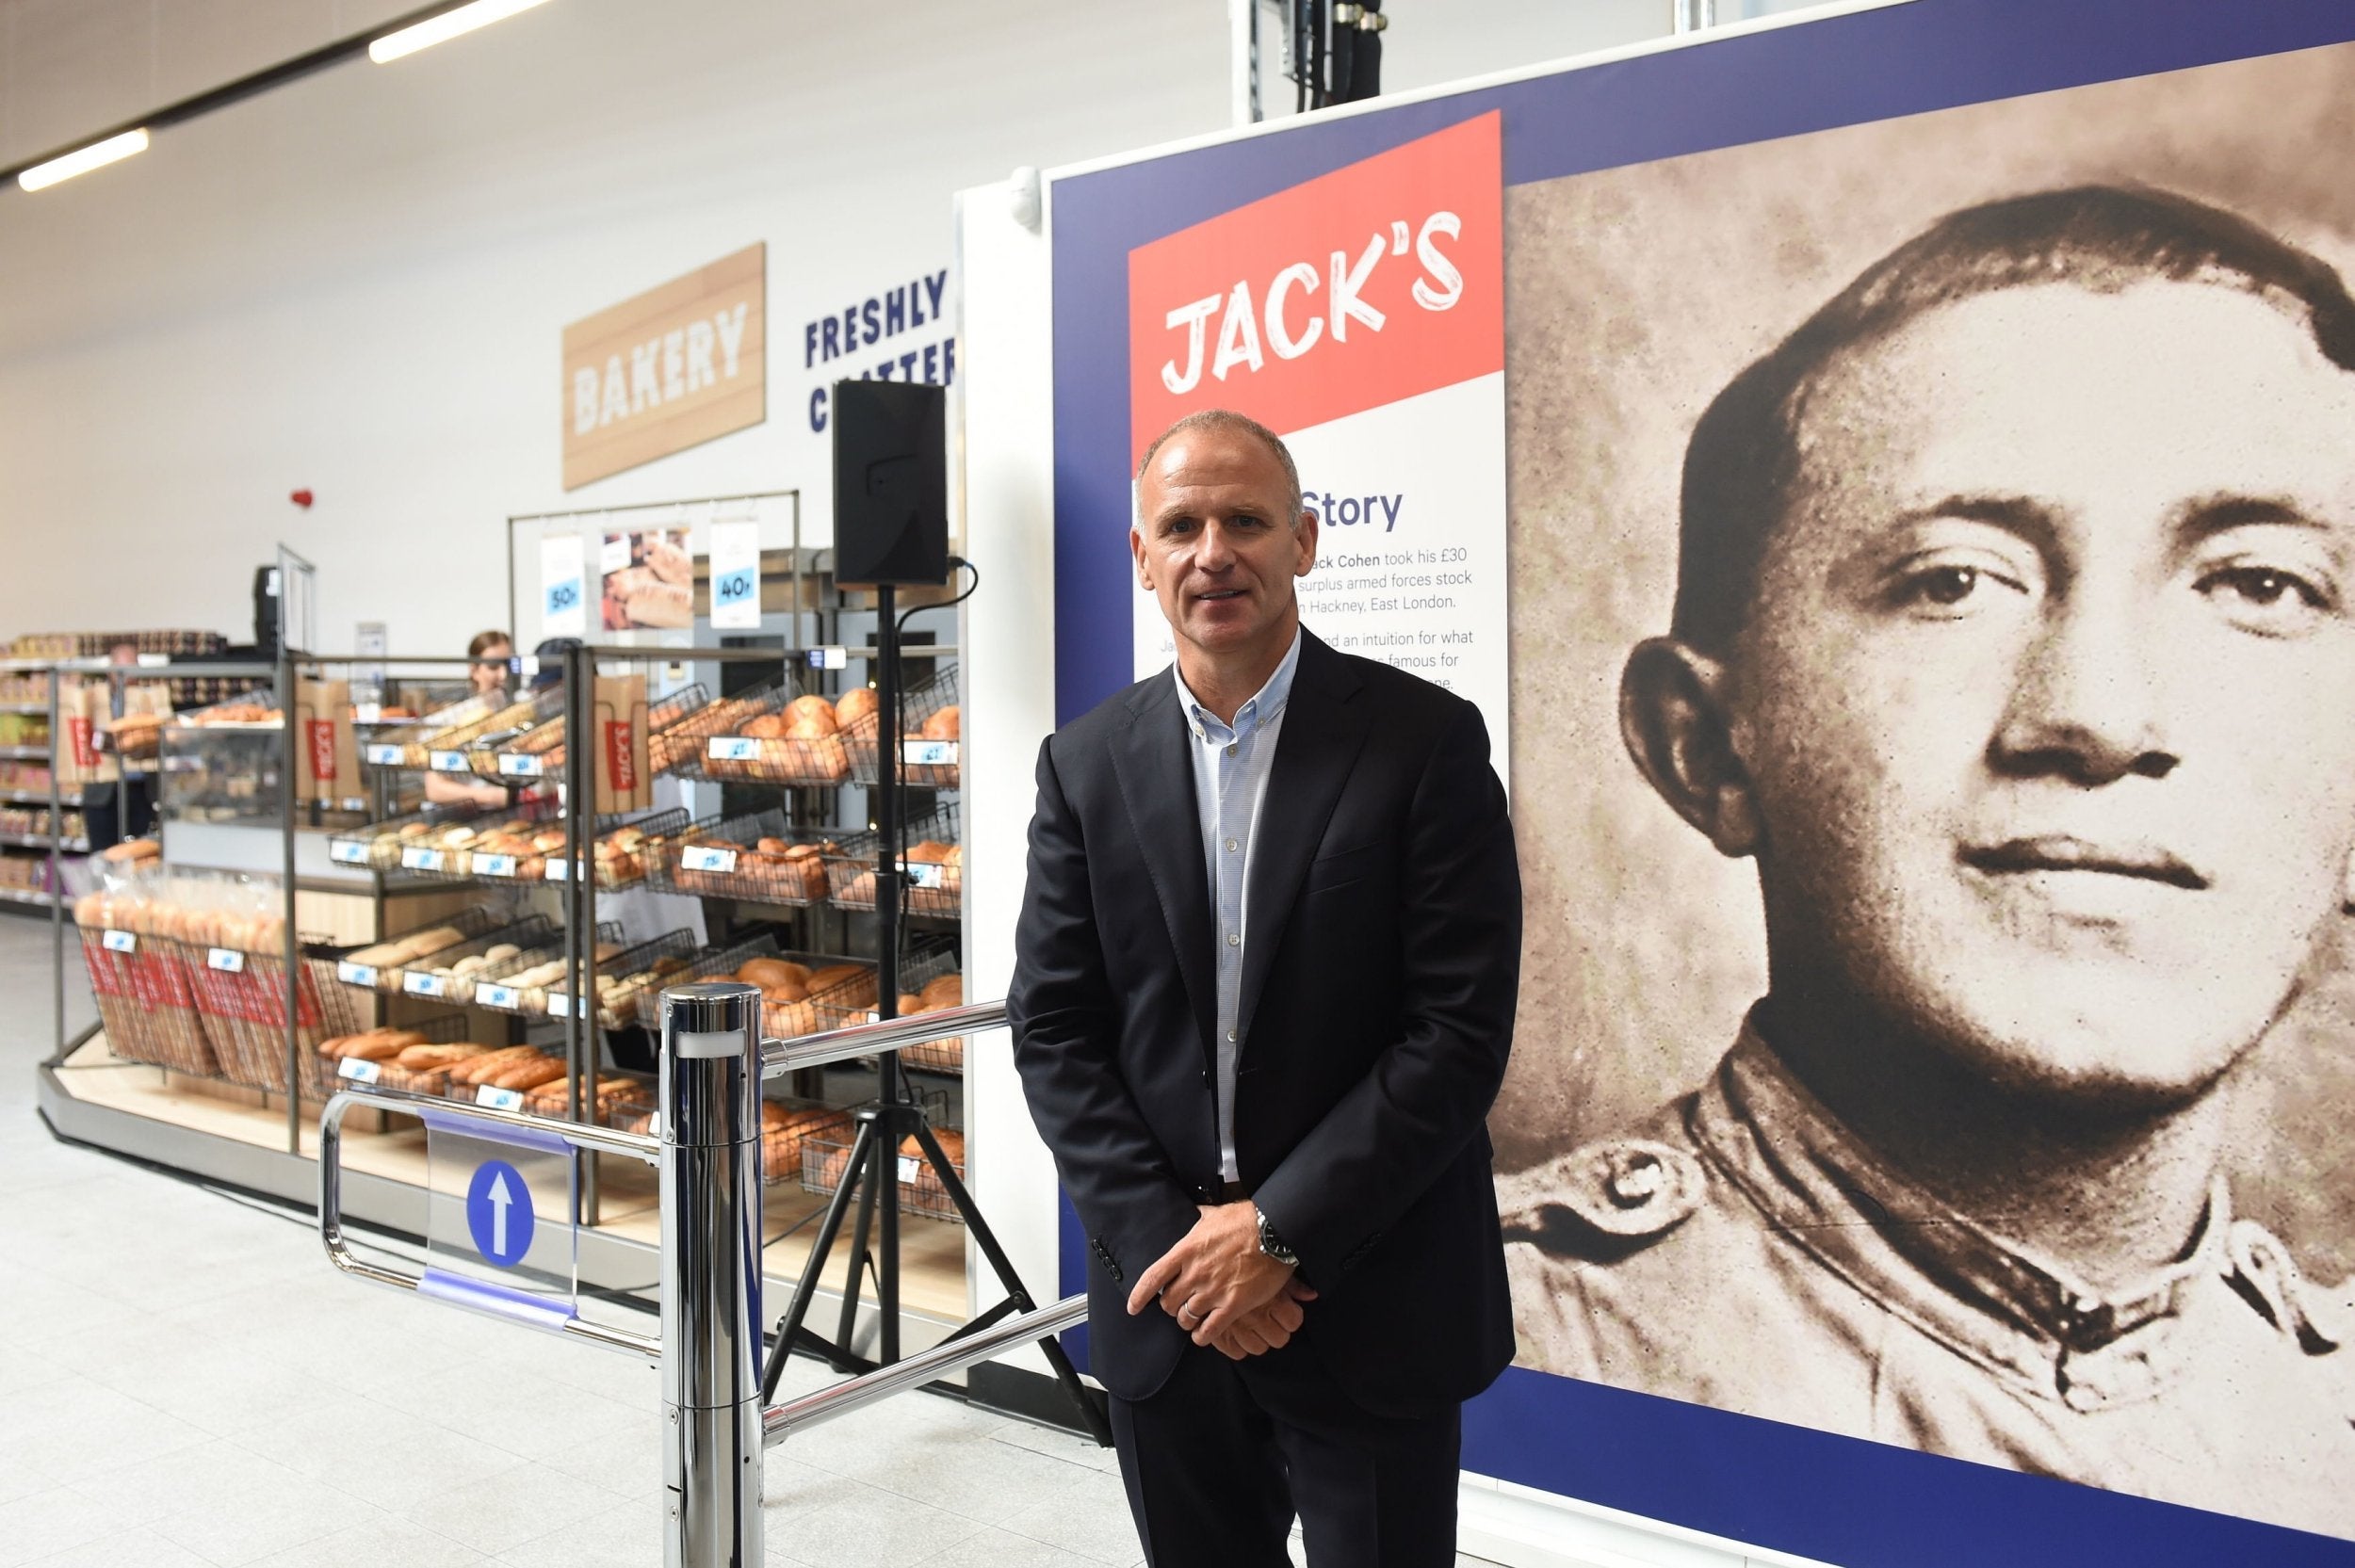 Tesco boss Dave Lewis at the launch of his new discounter 'Jack's". The format could do with a tweak